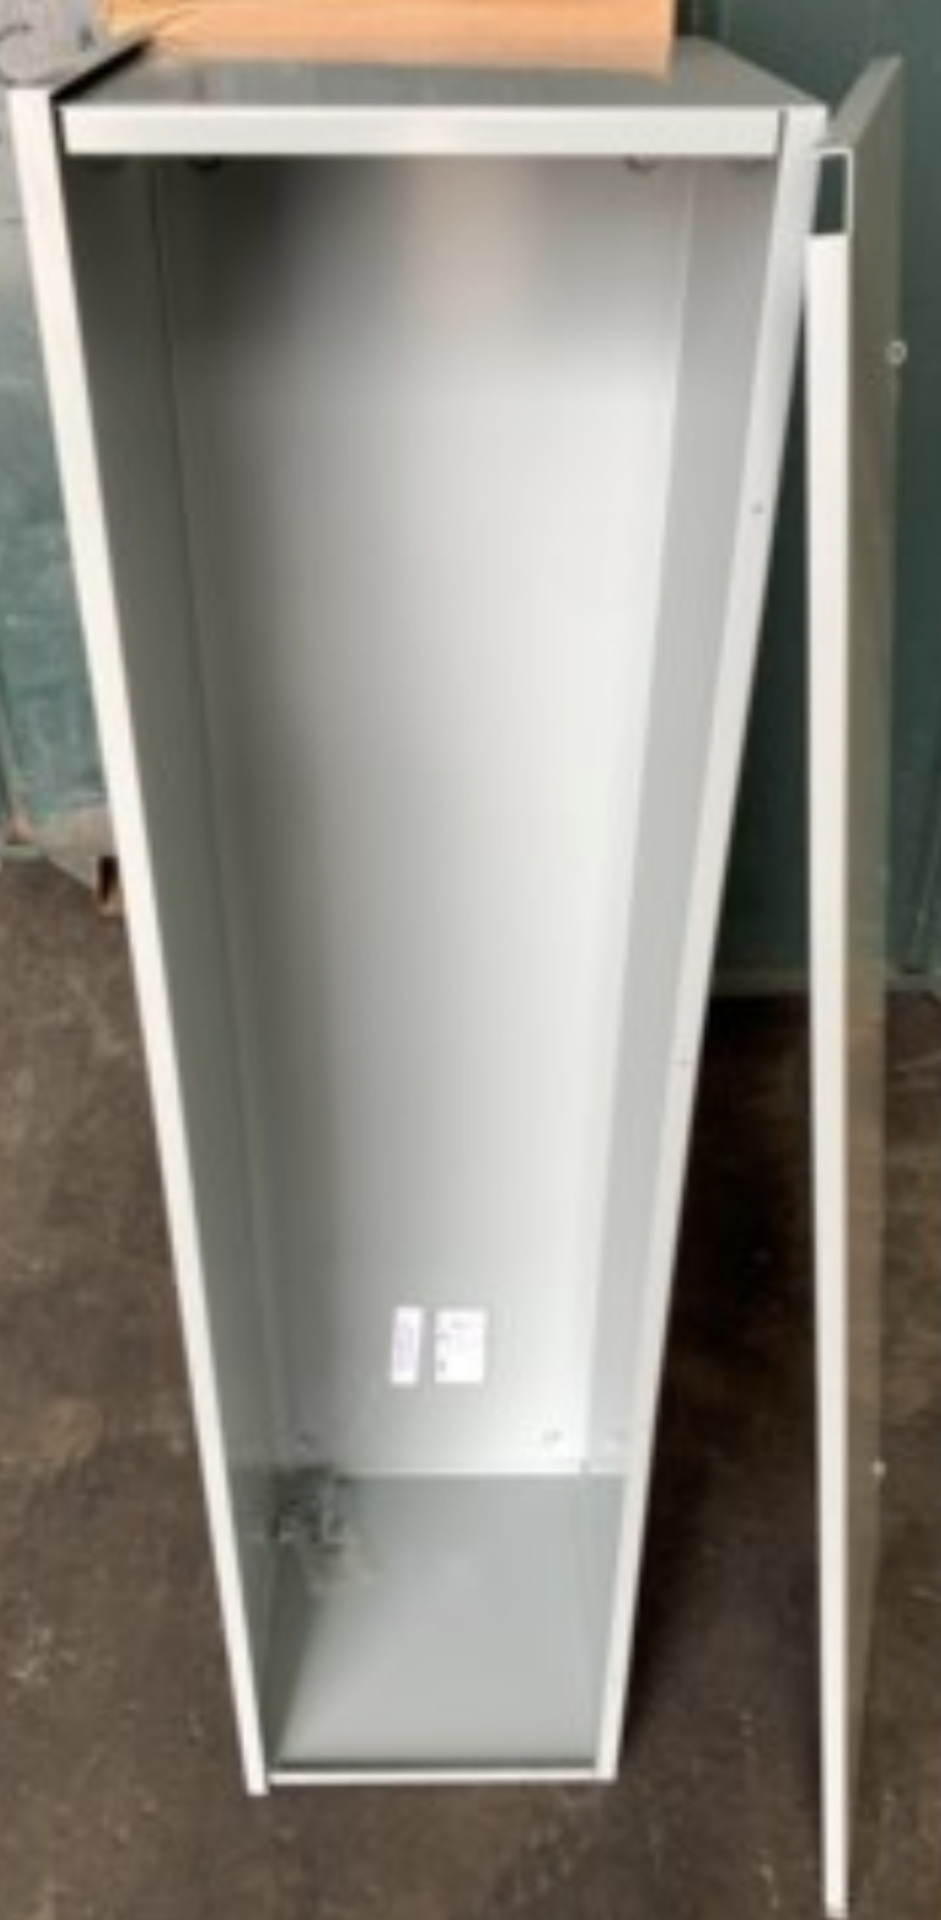 Cooper B-Line Type 3R Electrical Enclosure Unit, Wireway, 48"x12"x12" *Los Angeles Area Pickup Only - Image 2 of 10